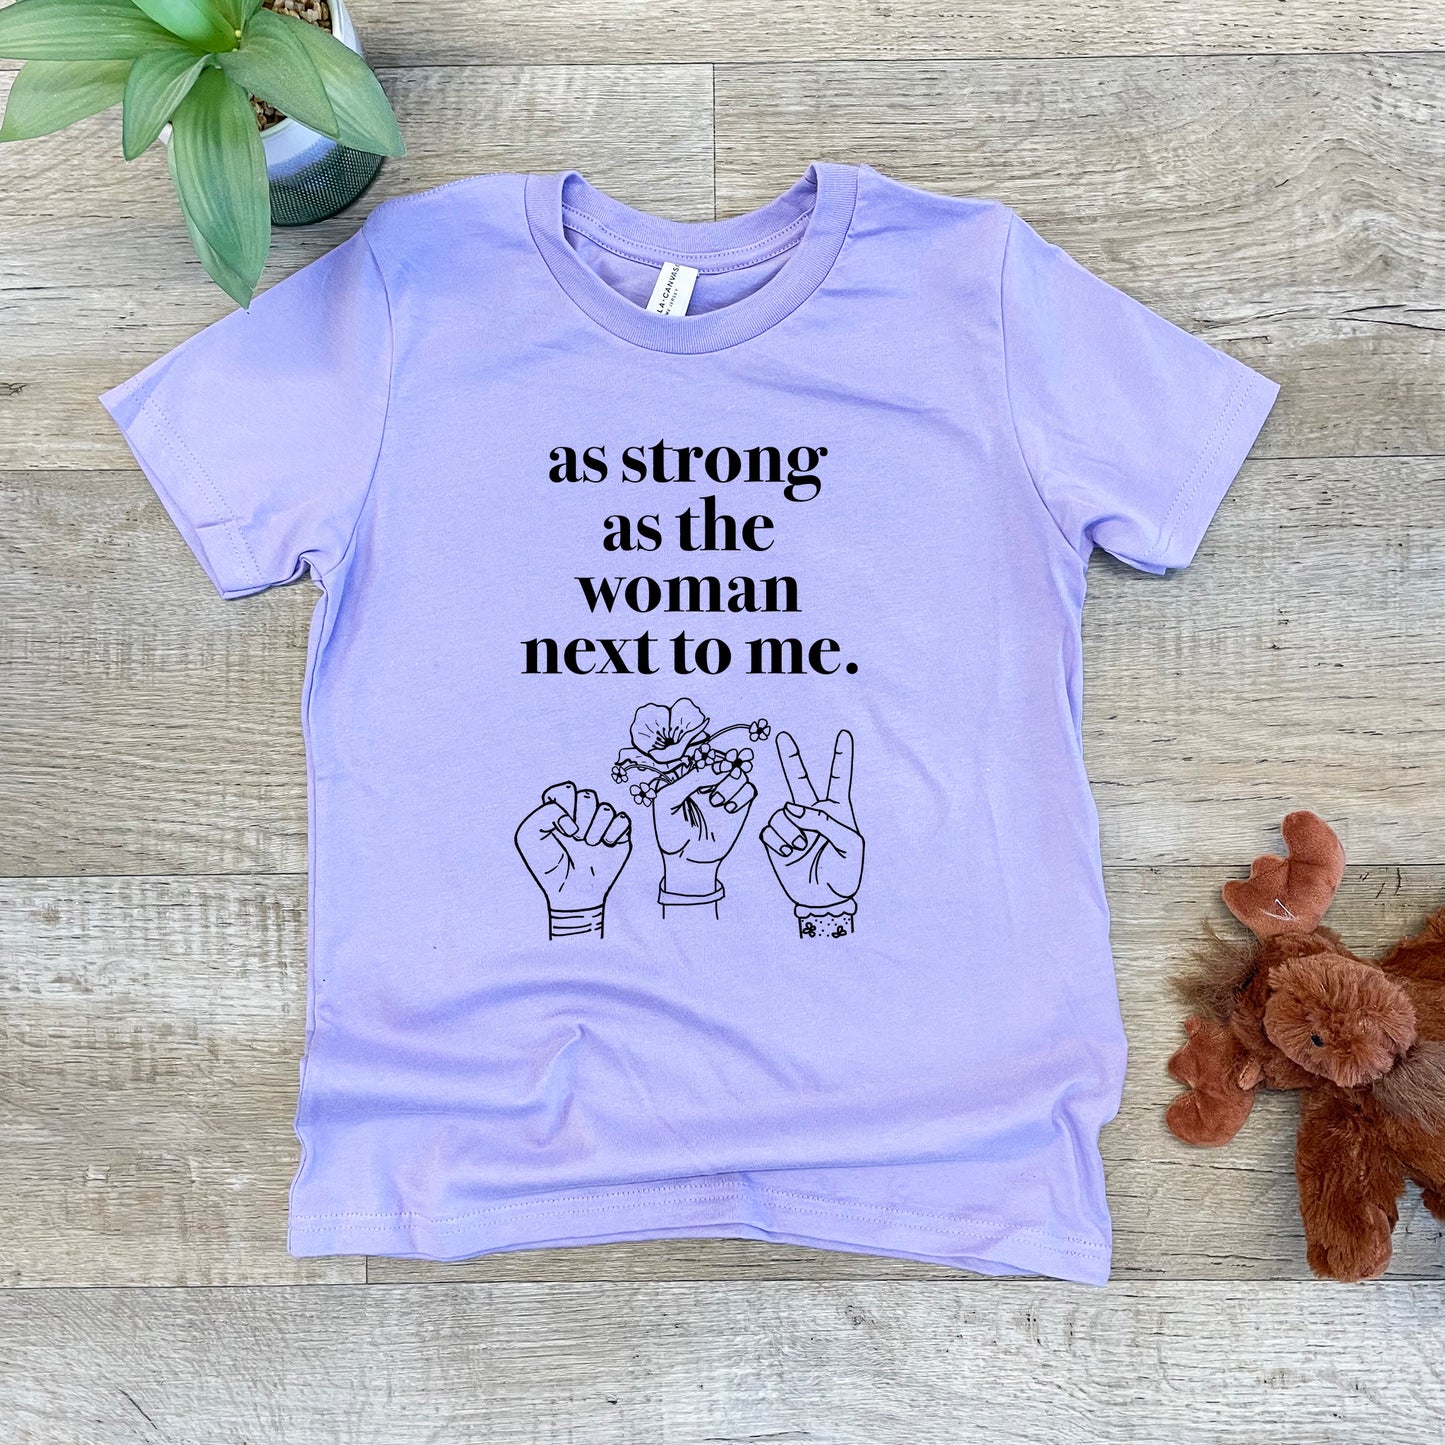 As Strong As The Woman Next To Me - Kid's Tee - Columbia Blue or Lavender